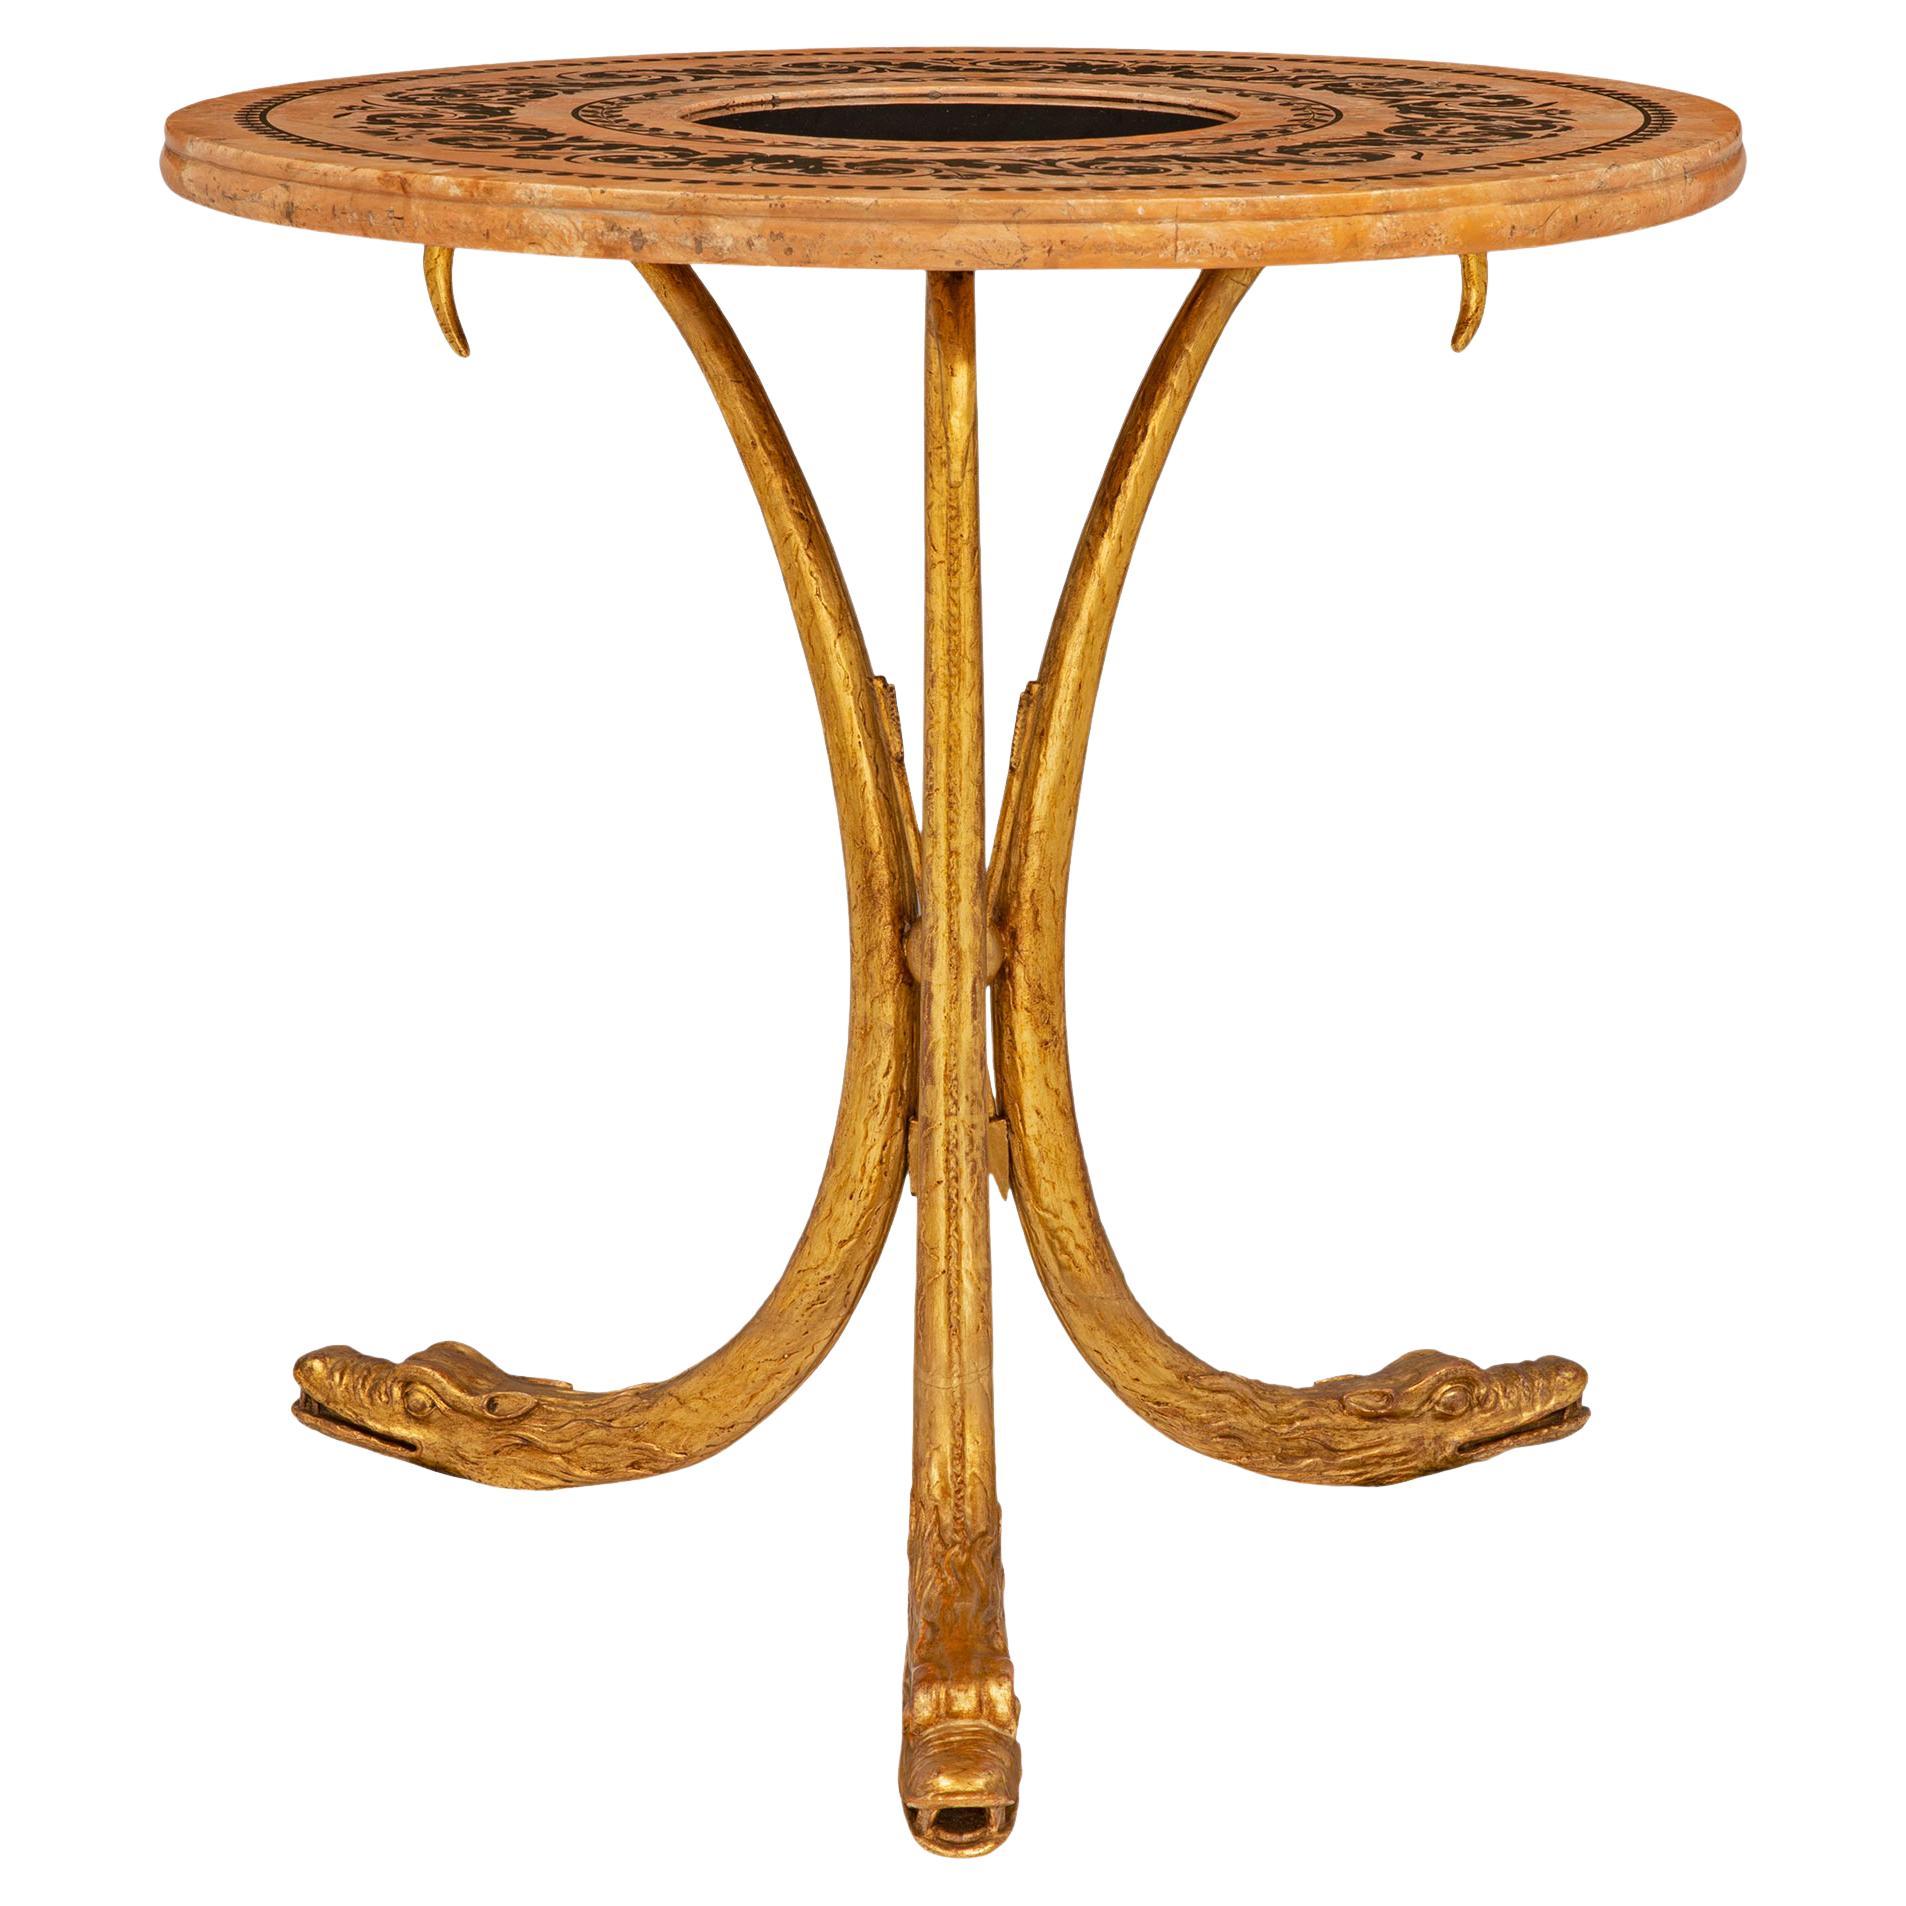 Italian 19th Century Neoclassical Style Center Table